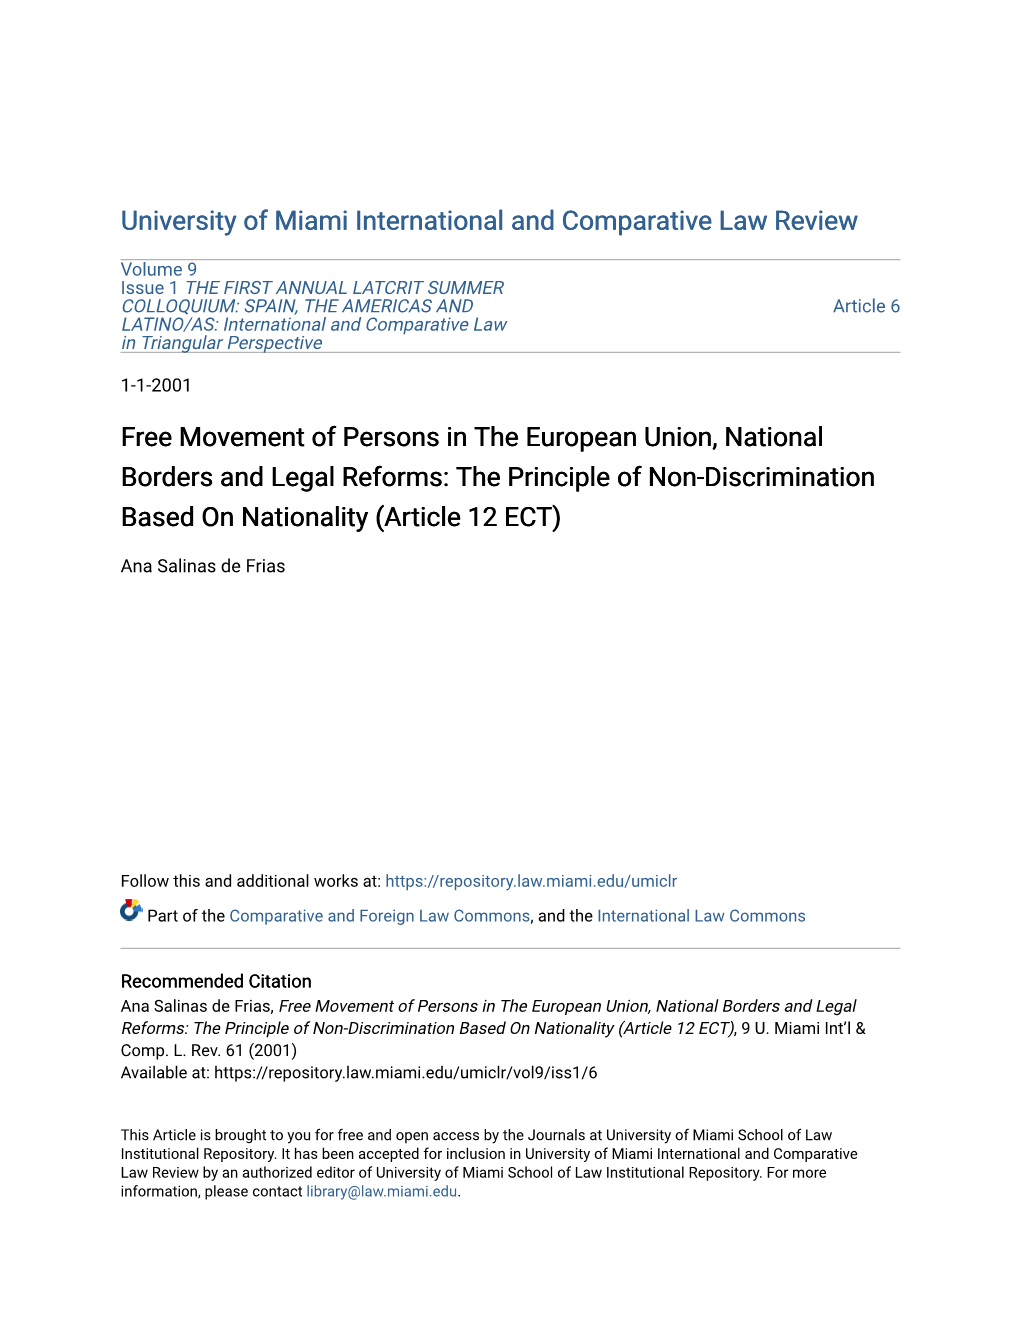 Free Movement of Persons in the European Union, National Borders and Legal Reforms: the Principle of Non-Discrimination Based on Nationality (Article 12 ECT)